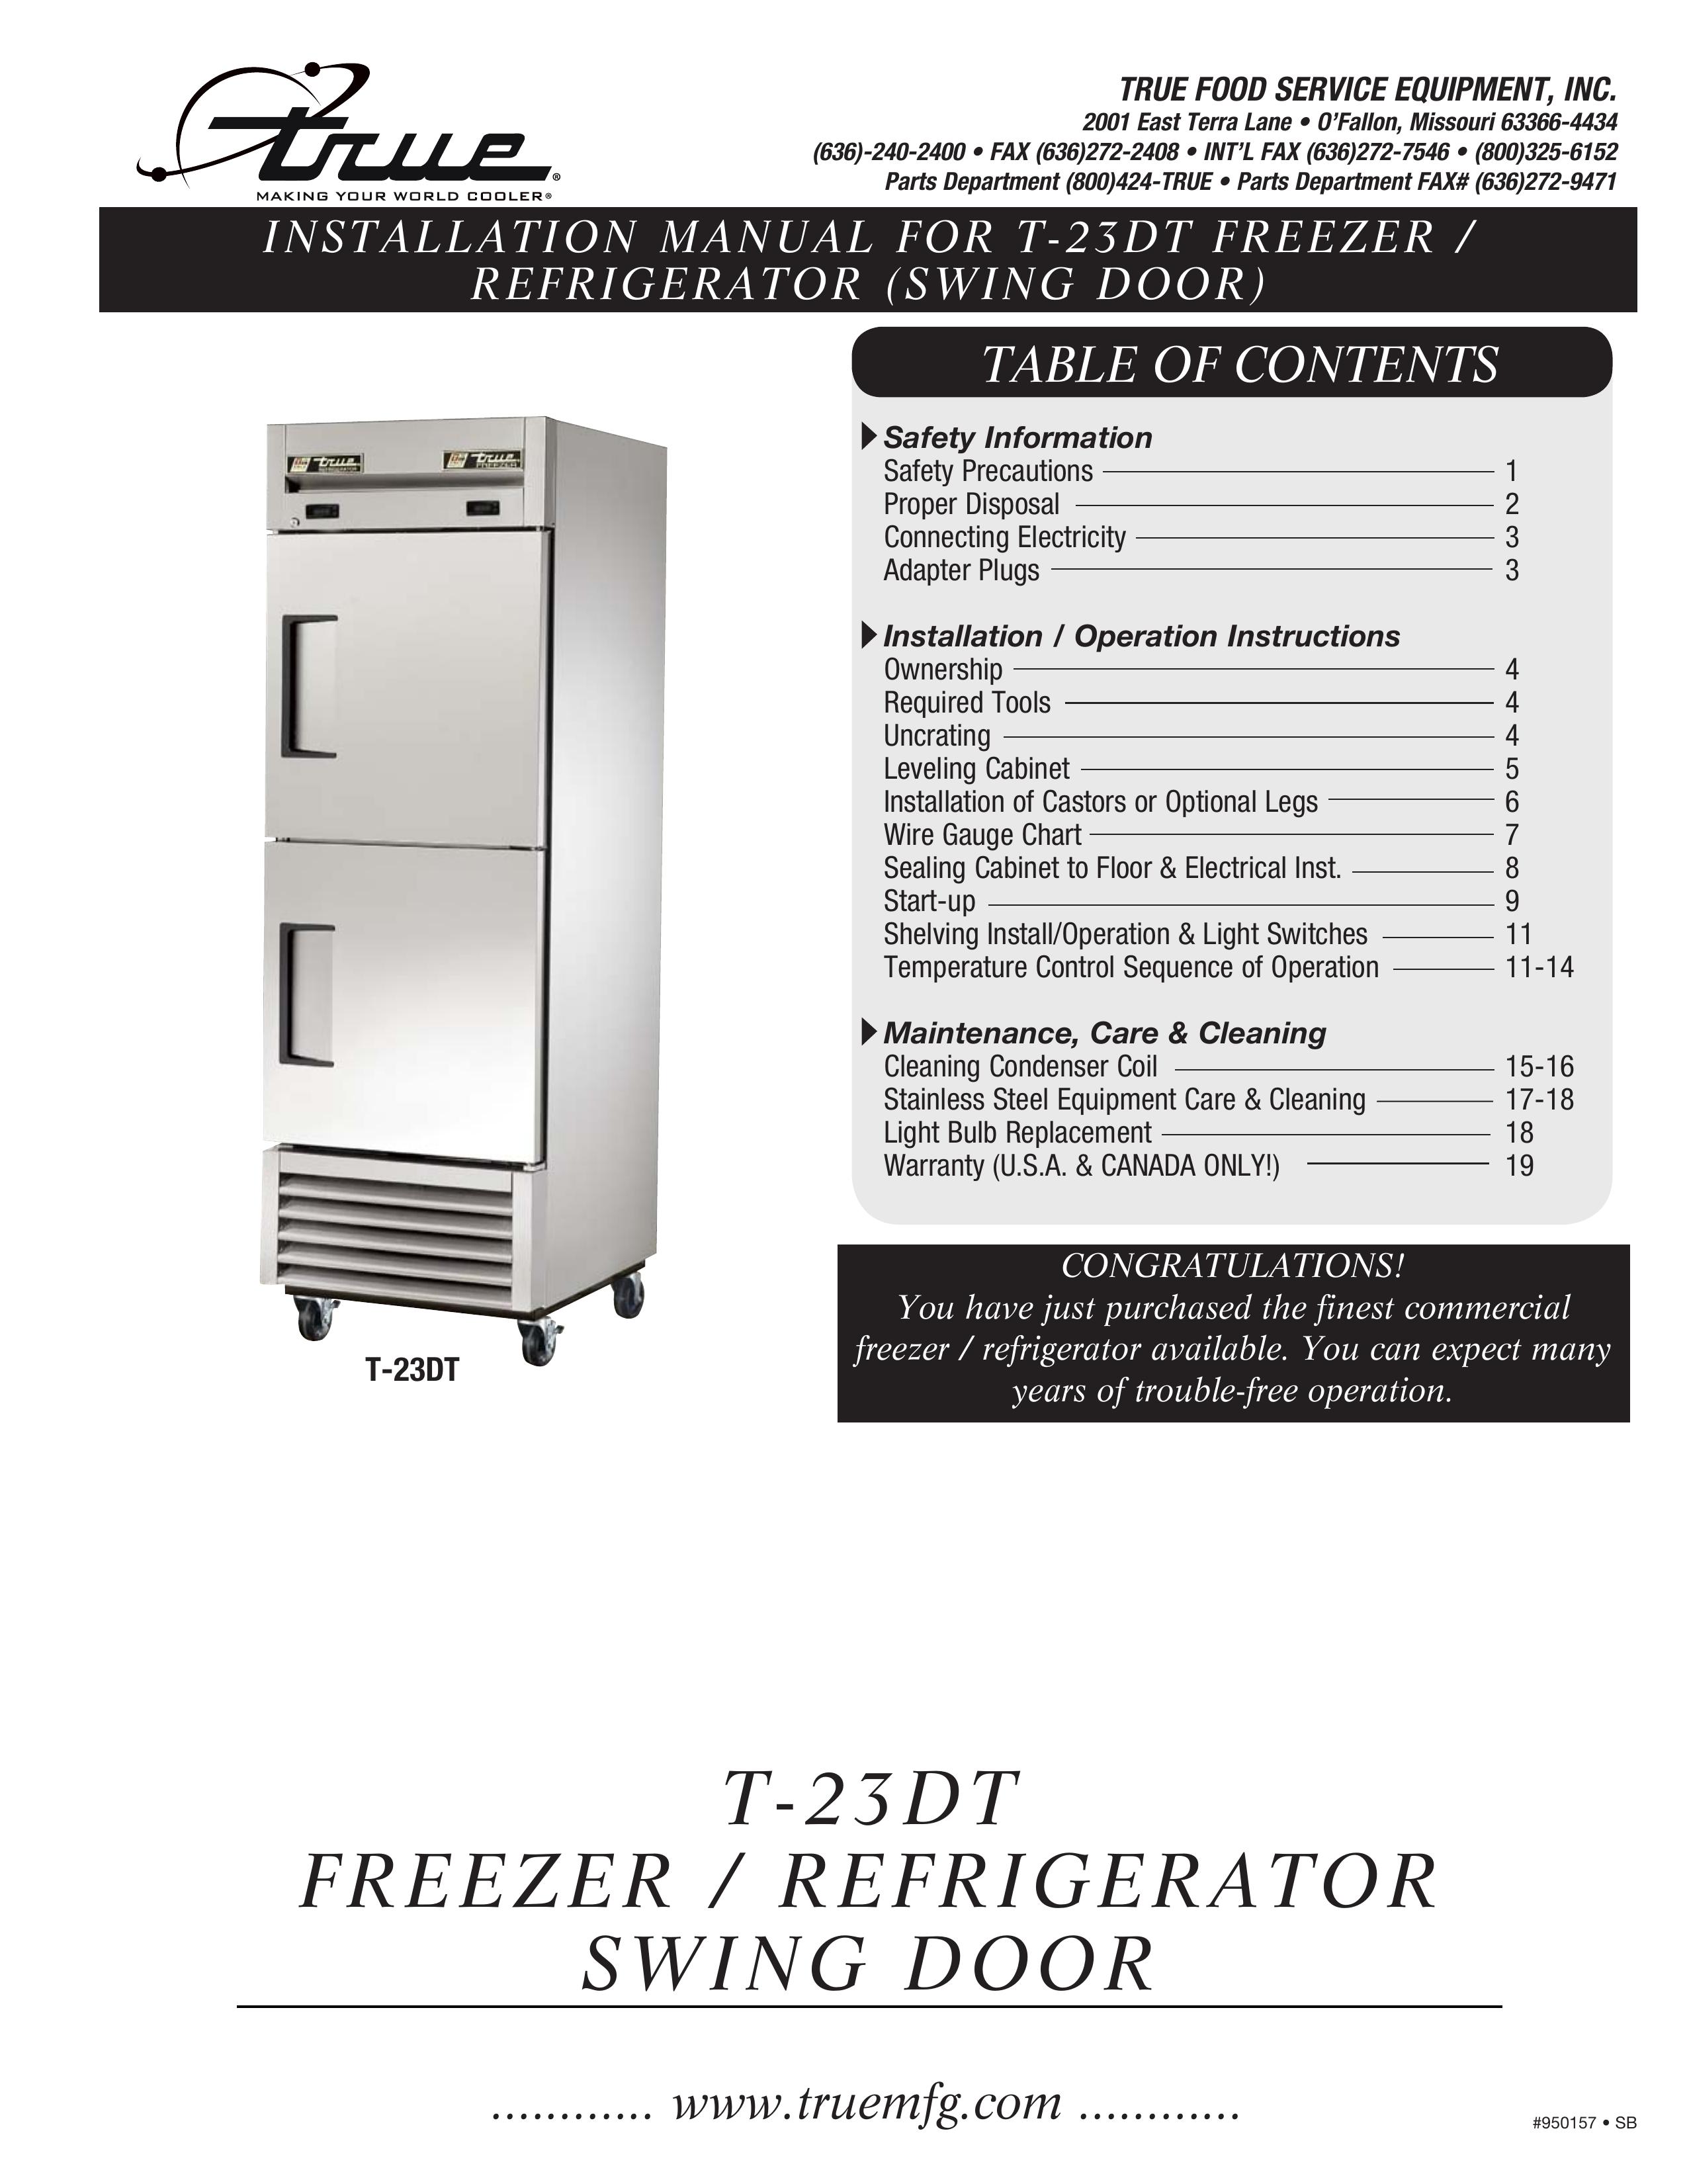 True Manufacturing Company T-23DT Refrigerator User Manual